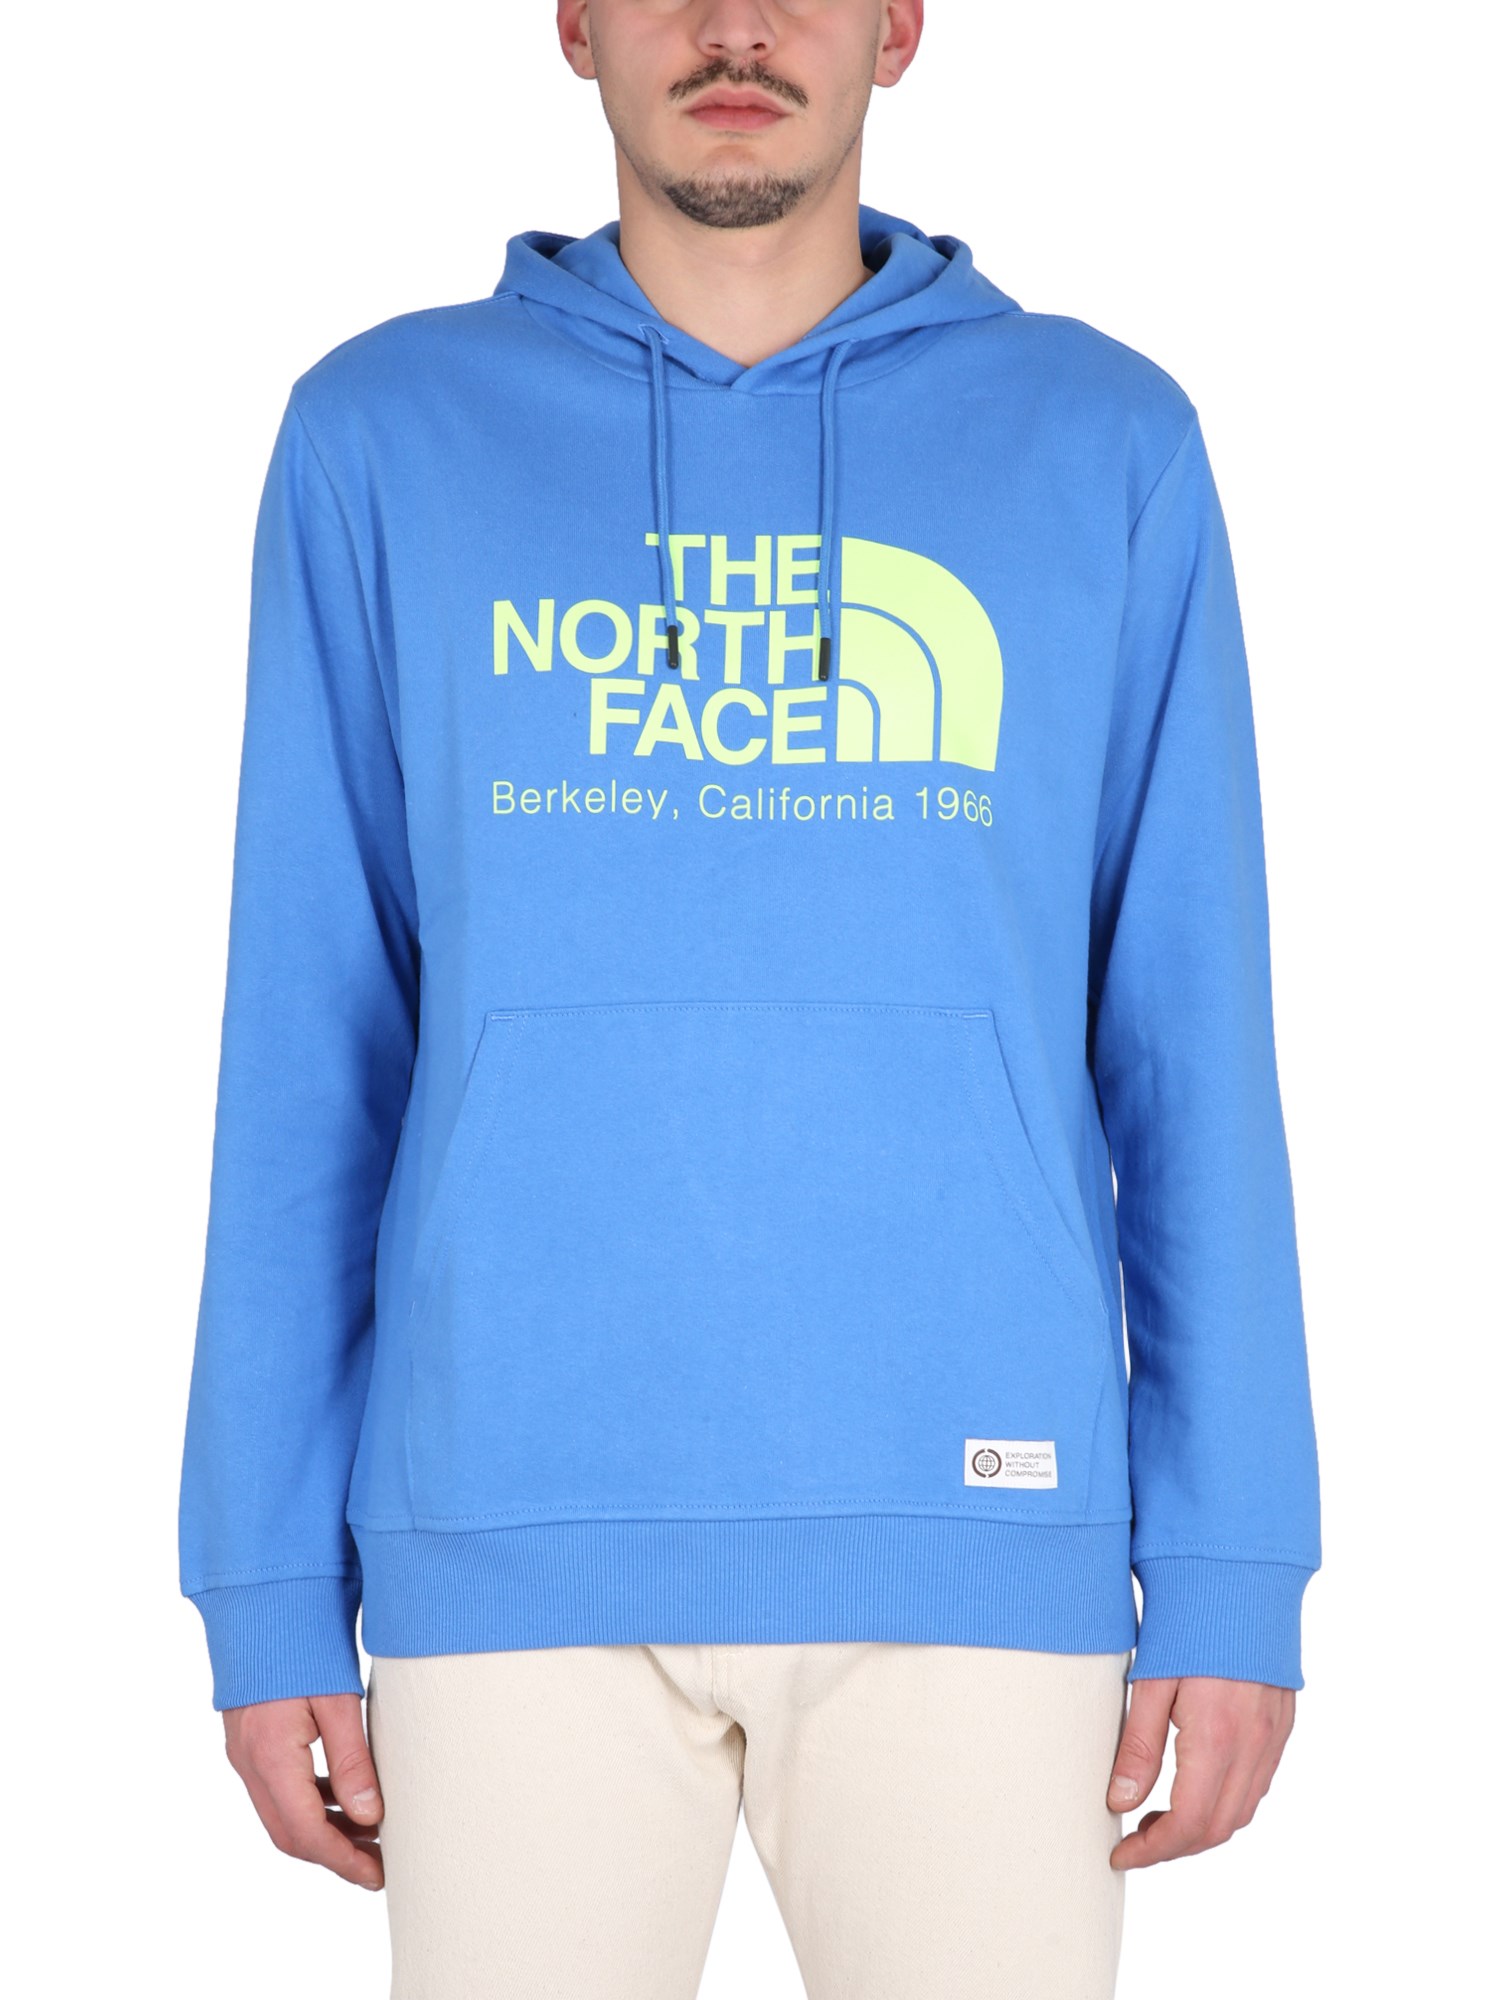 The North Face Sweatshirt With Logo Embroidery In Blue